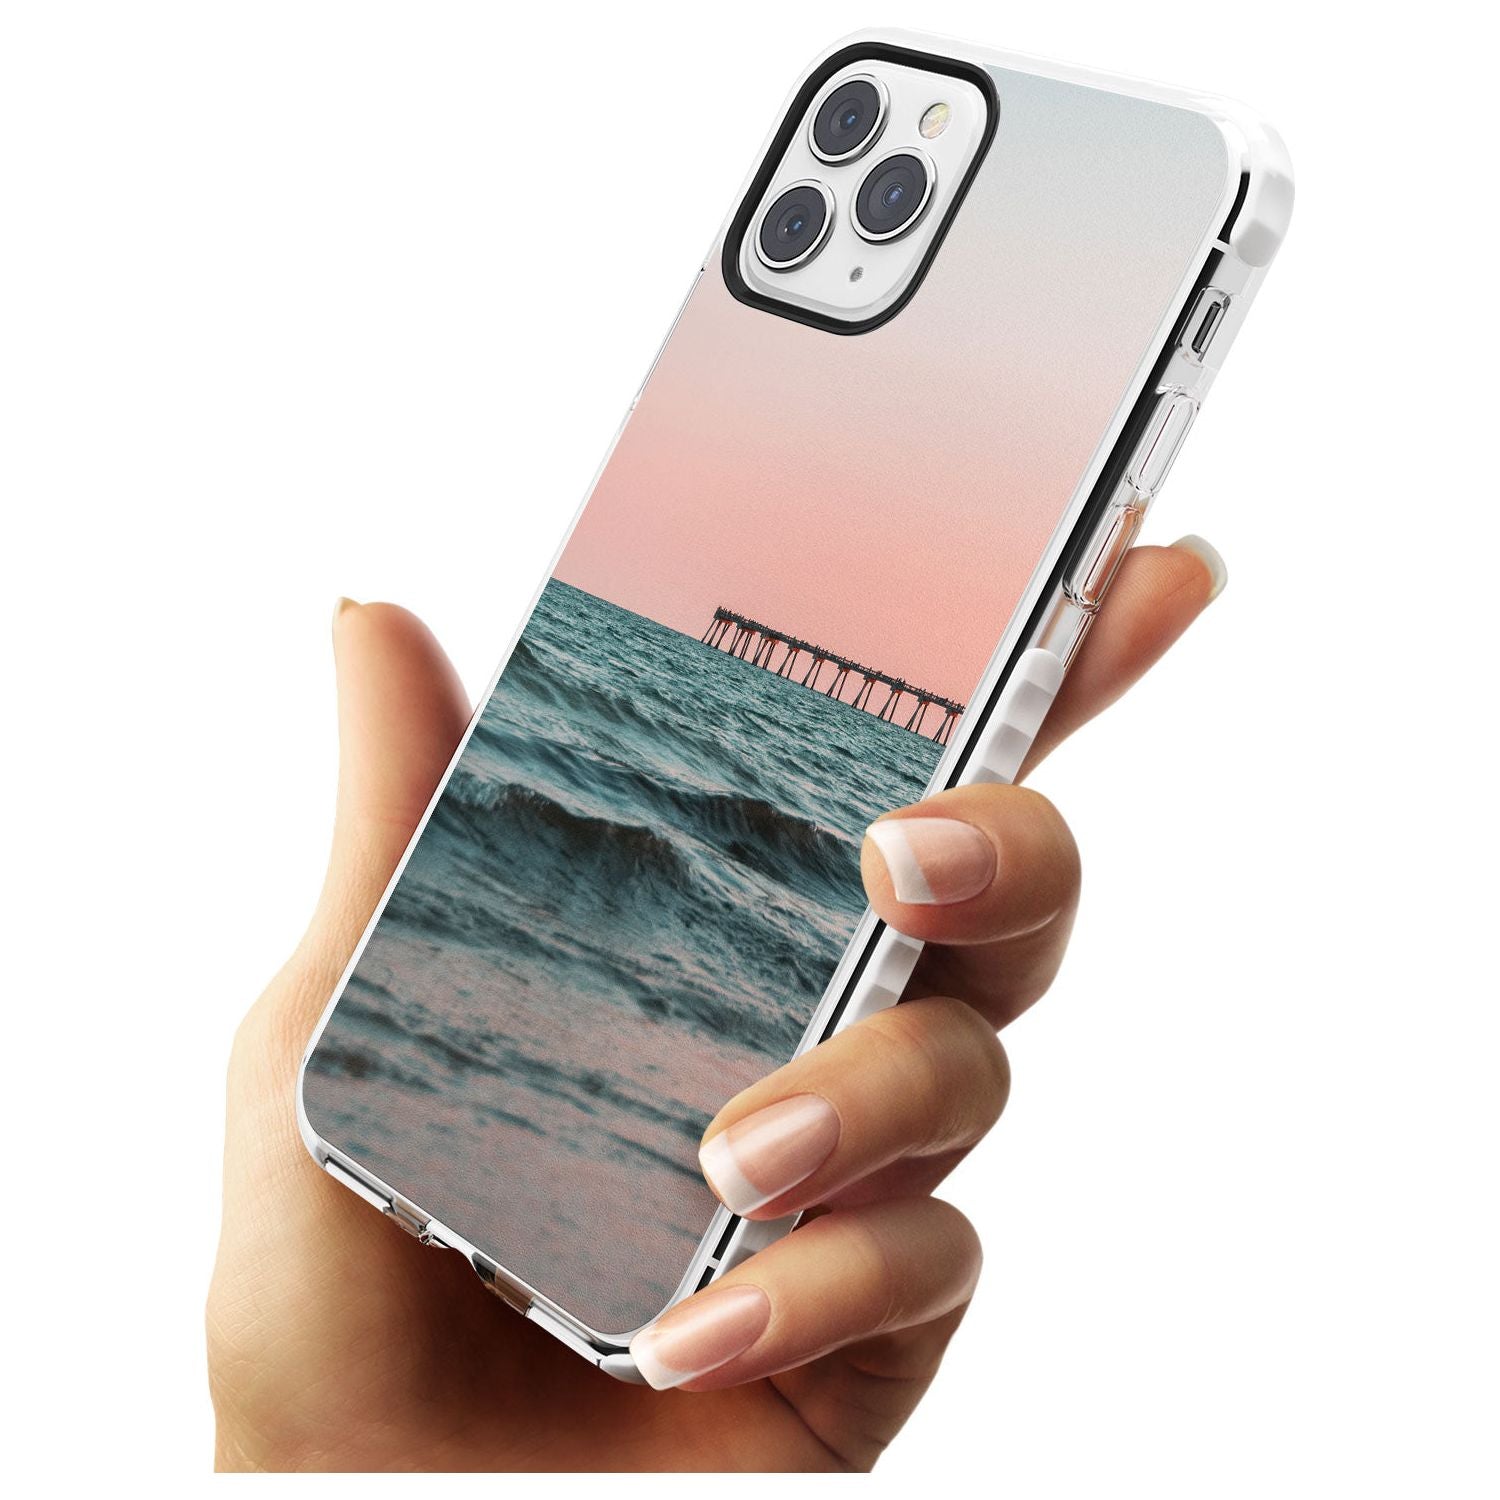 Beach Pier Photograph Impact Phone Case for iPhone 11 Pro Max